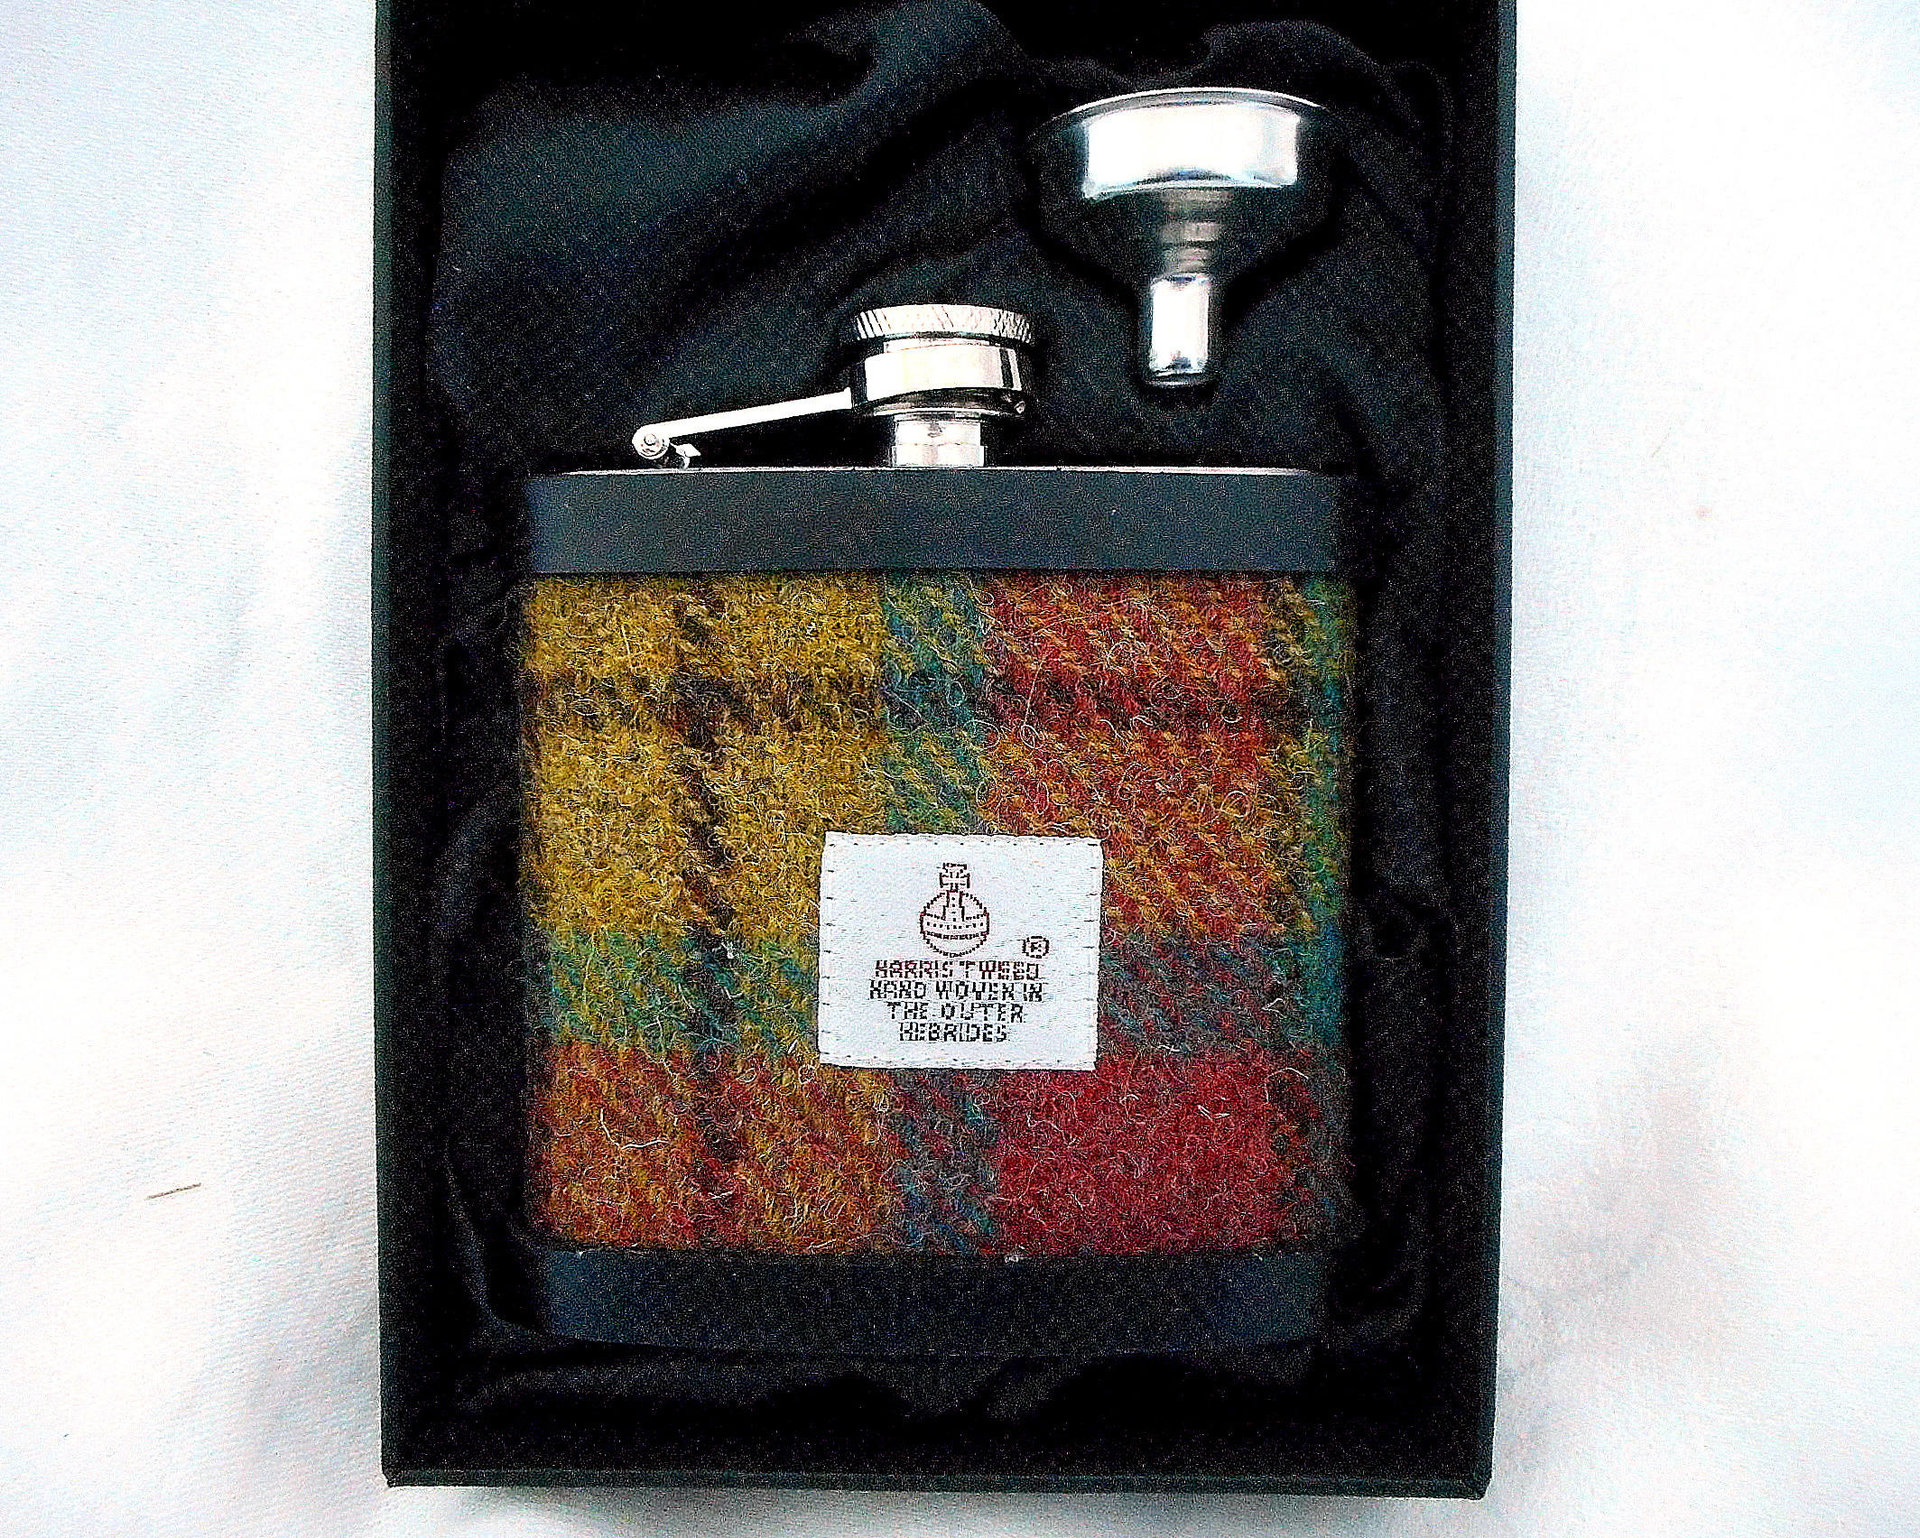 Harris Tweed hip flask Ancient weathered Buchanan colours, yellow green and rose red plaid  made in scotland